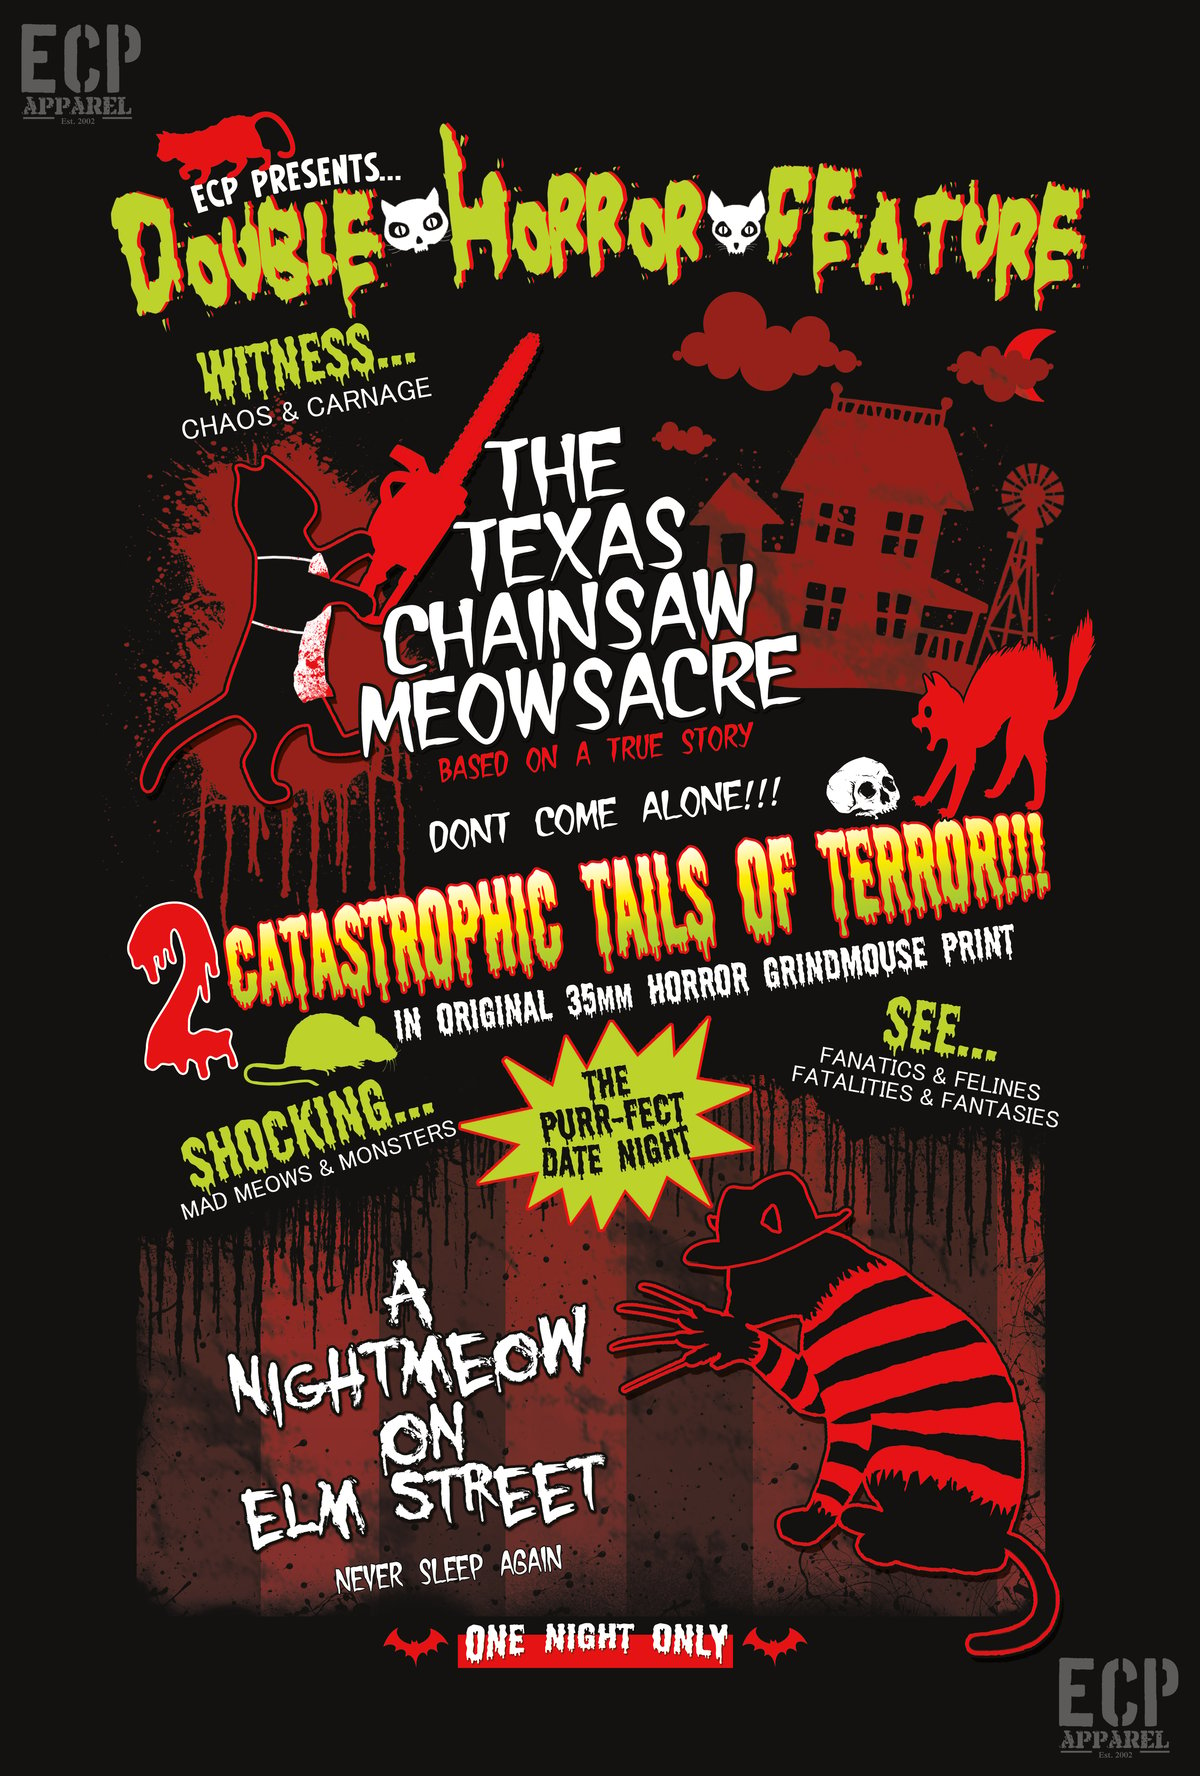 Texas Chainsaw Meowsacre/ Nightmeow On Elm St. Limited Print